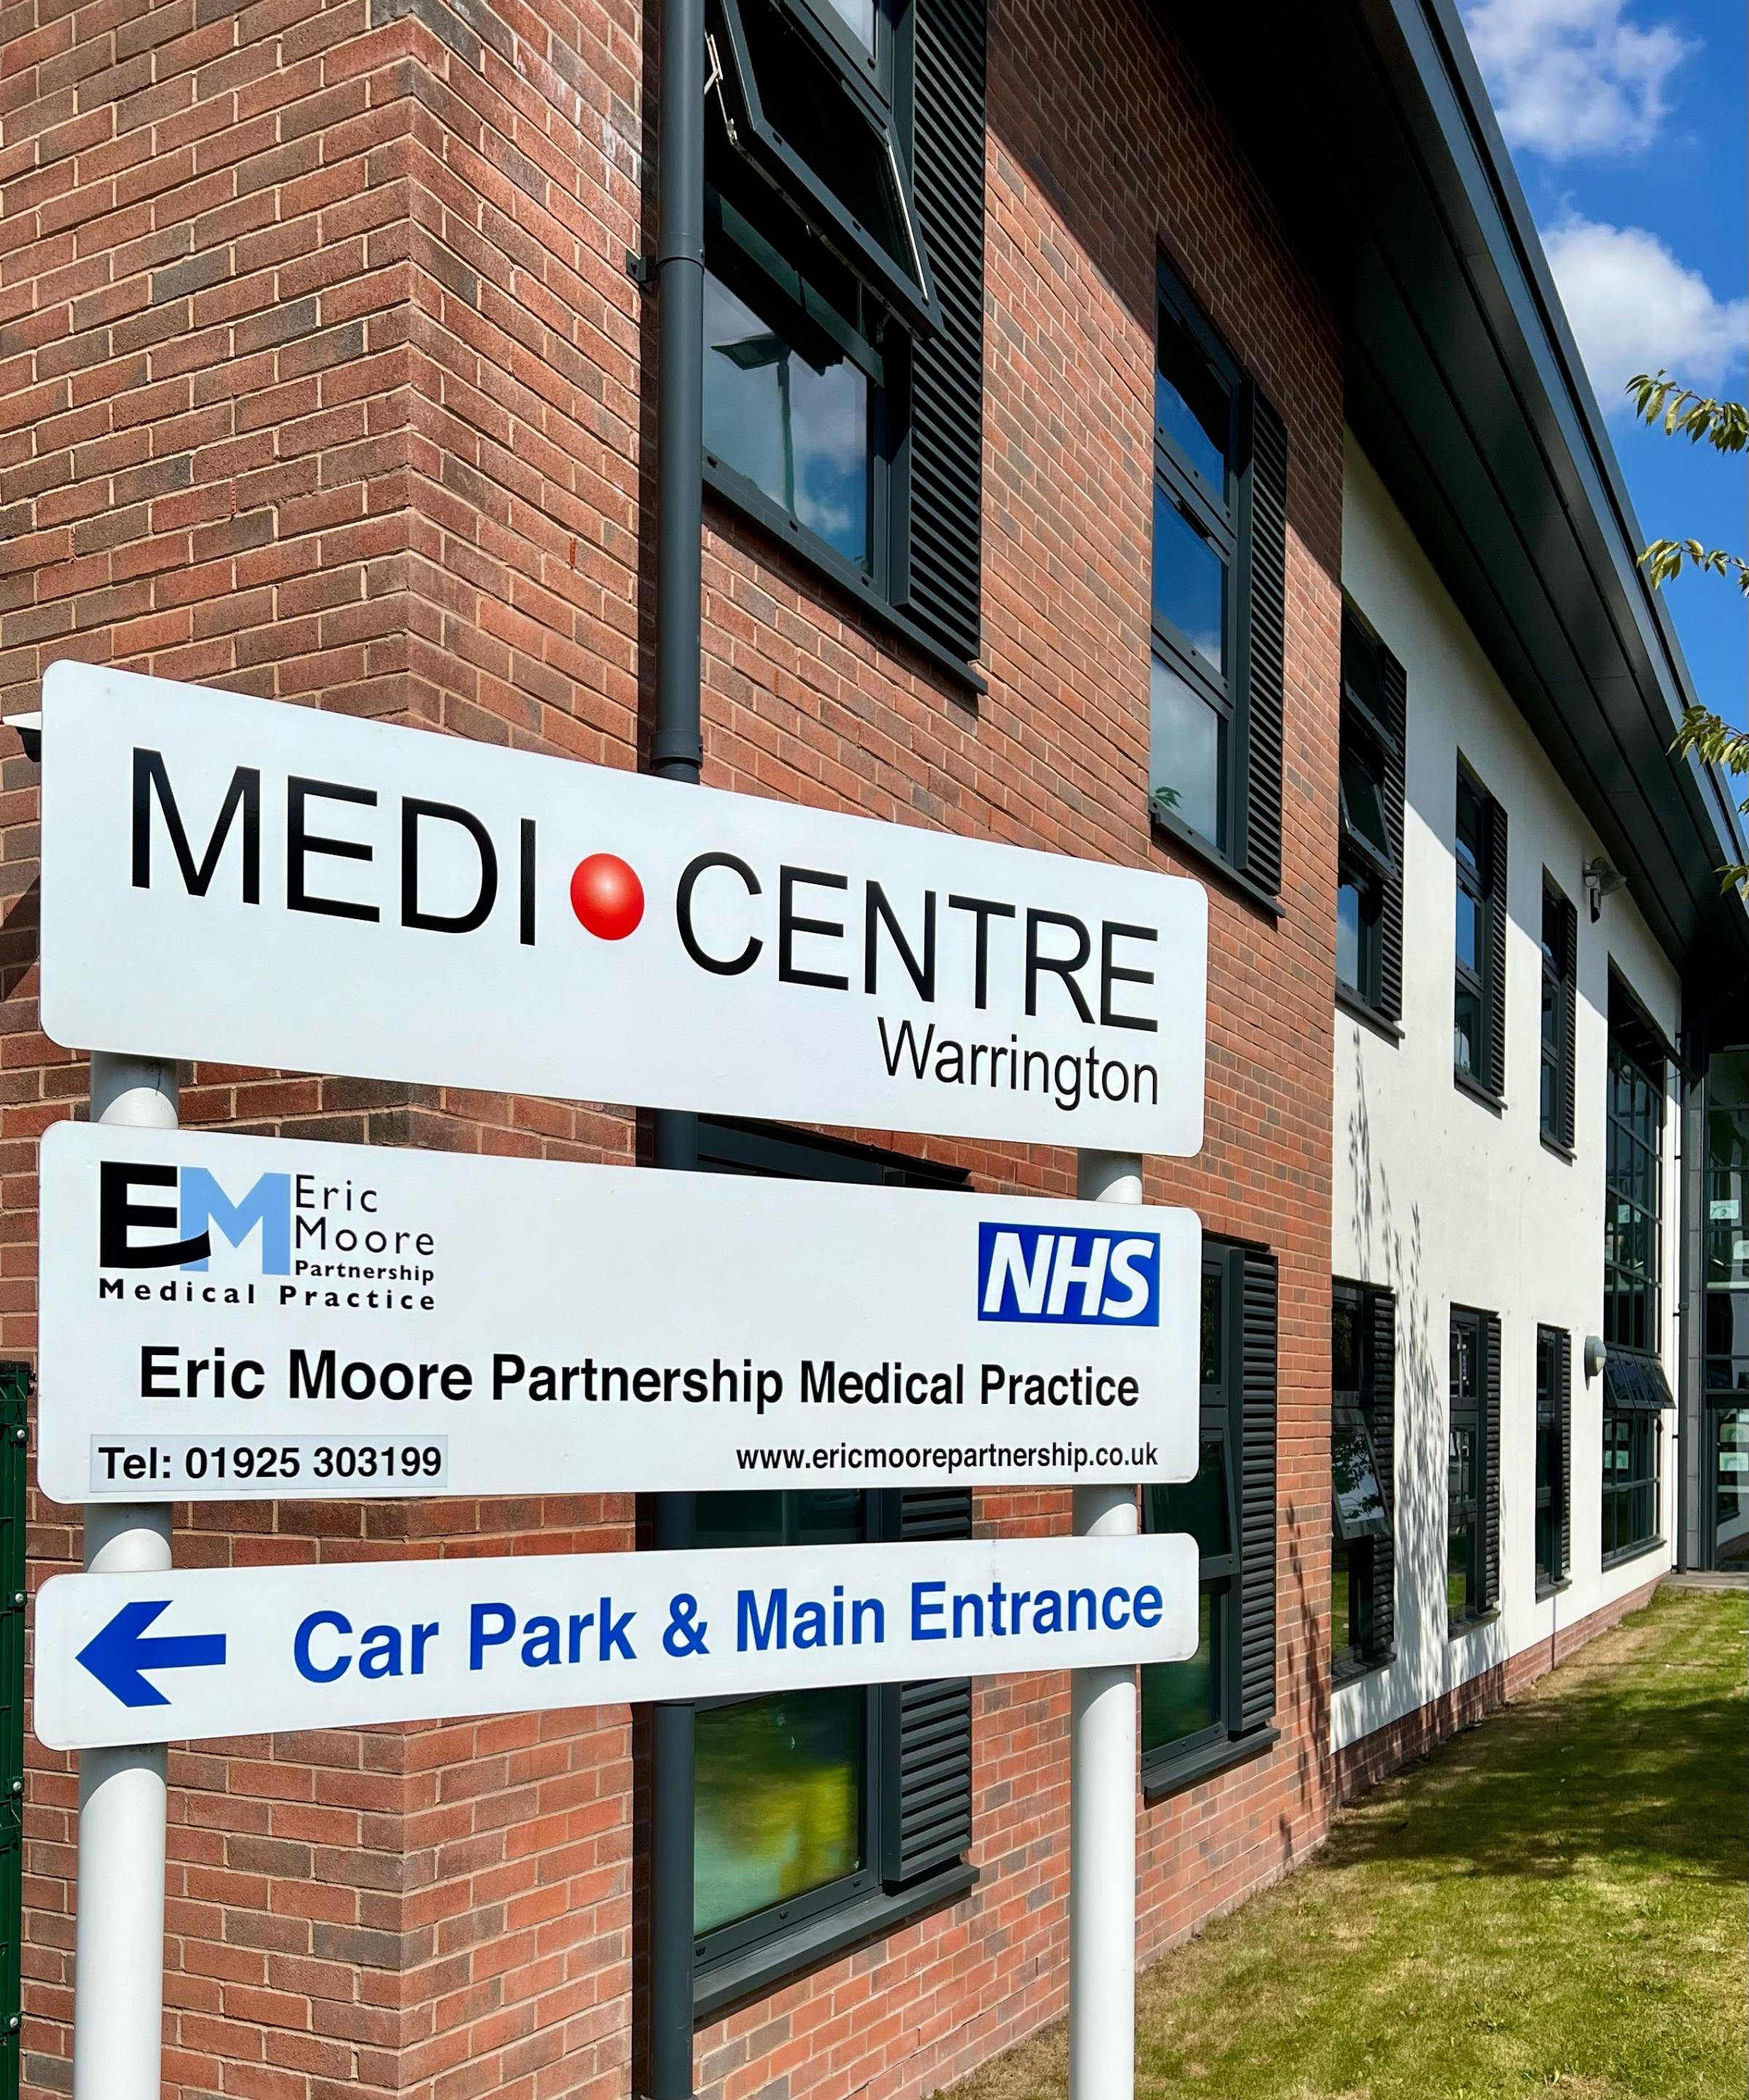 The Eric Moore Partnership Medical Practice on Tanners Lane (Image: Google Maps)